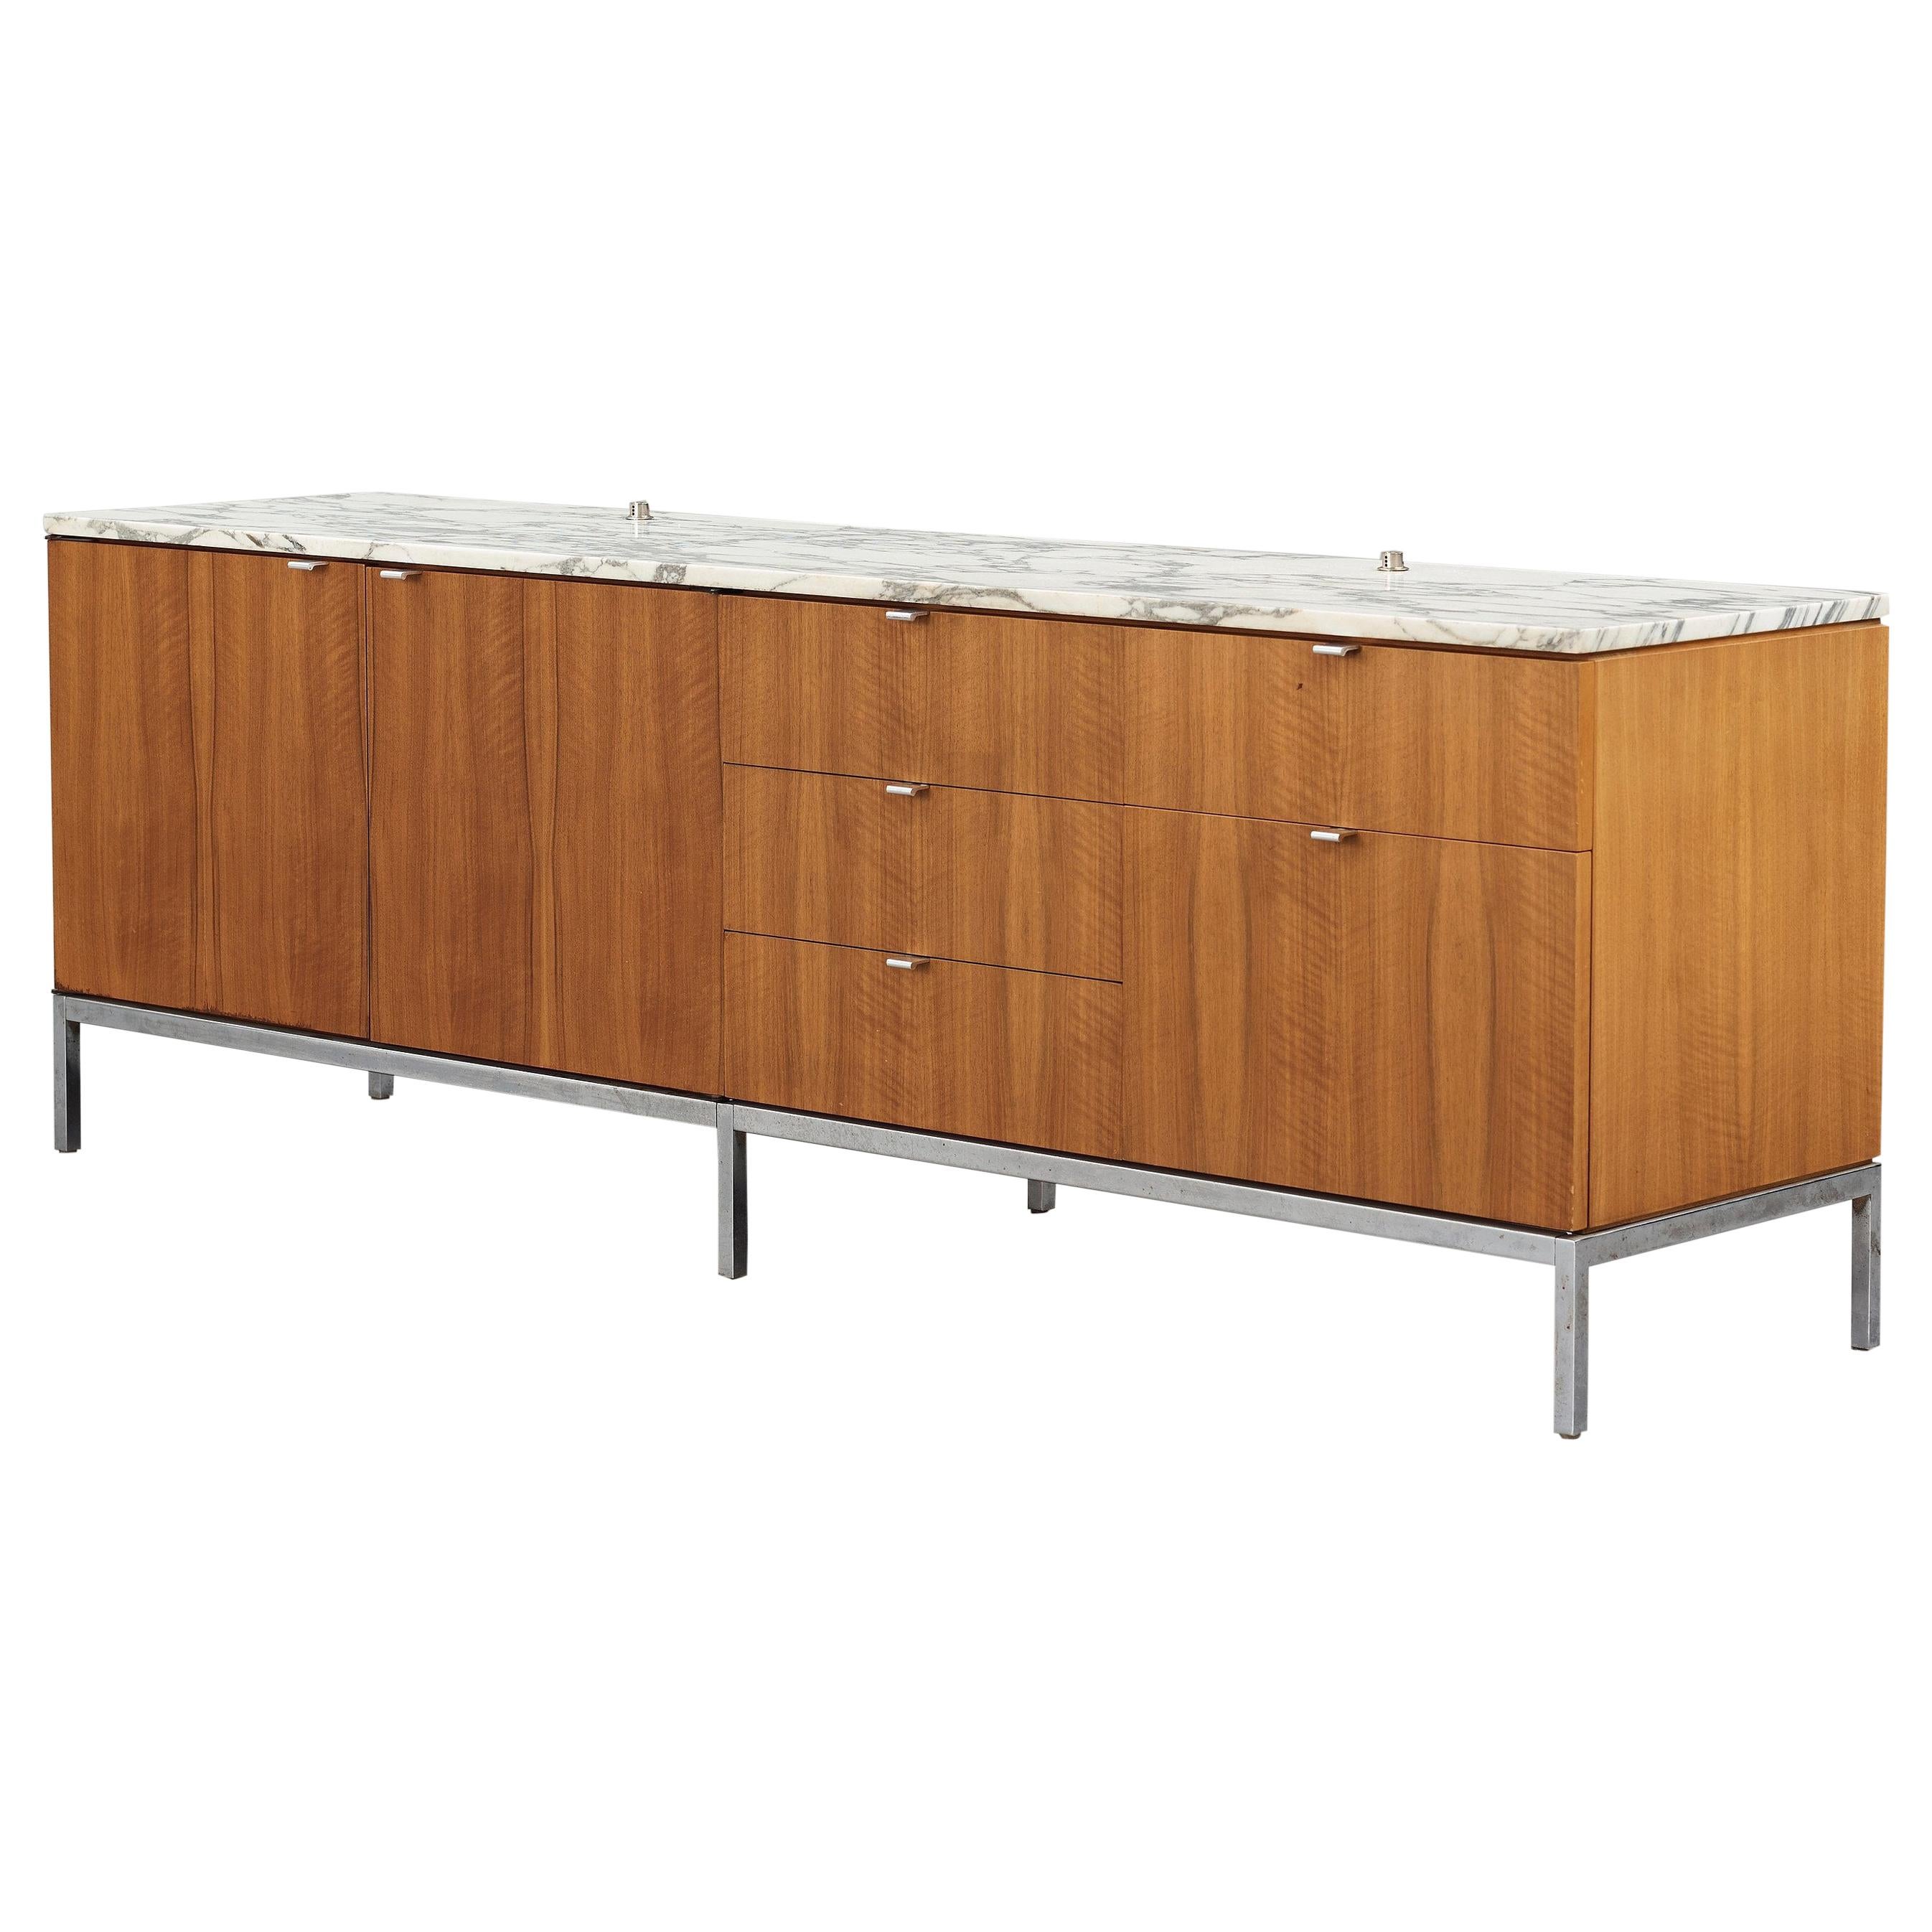 Florence Knoll Walnut and Marble Credenza / Sideboard, by Nordiska Sweden, 1966